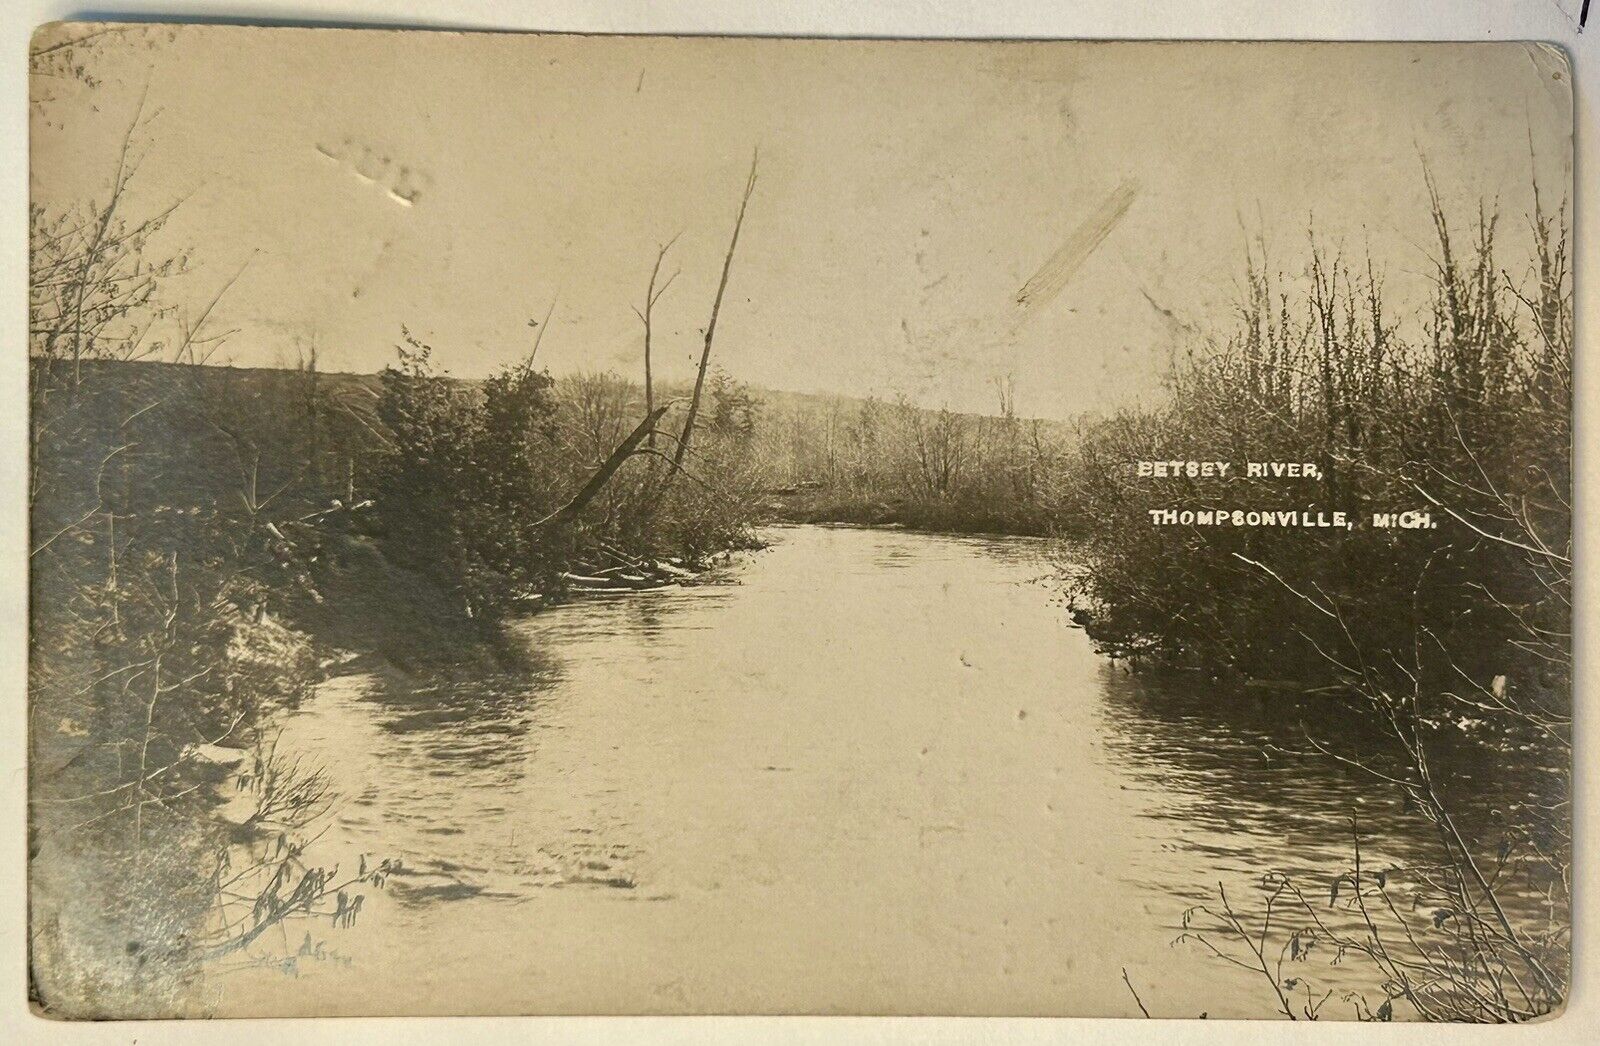 Betsey River. Thompsonville Michigan. Real Photo Postcard. 1910.